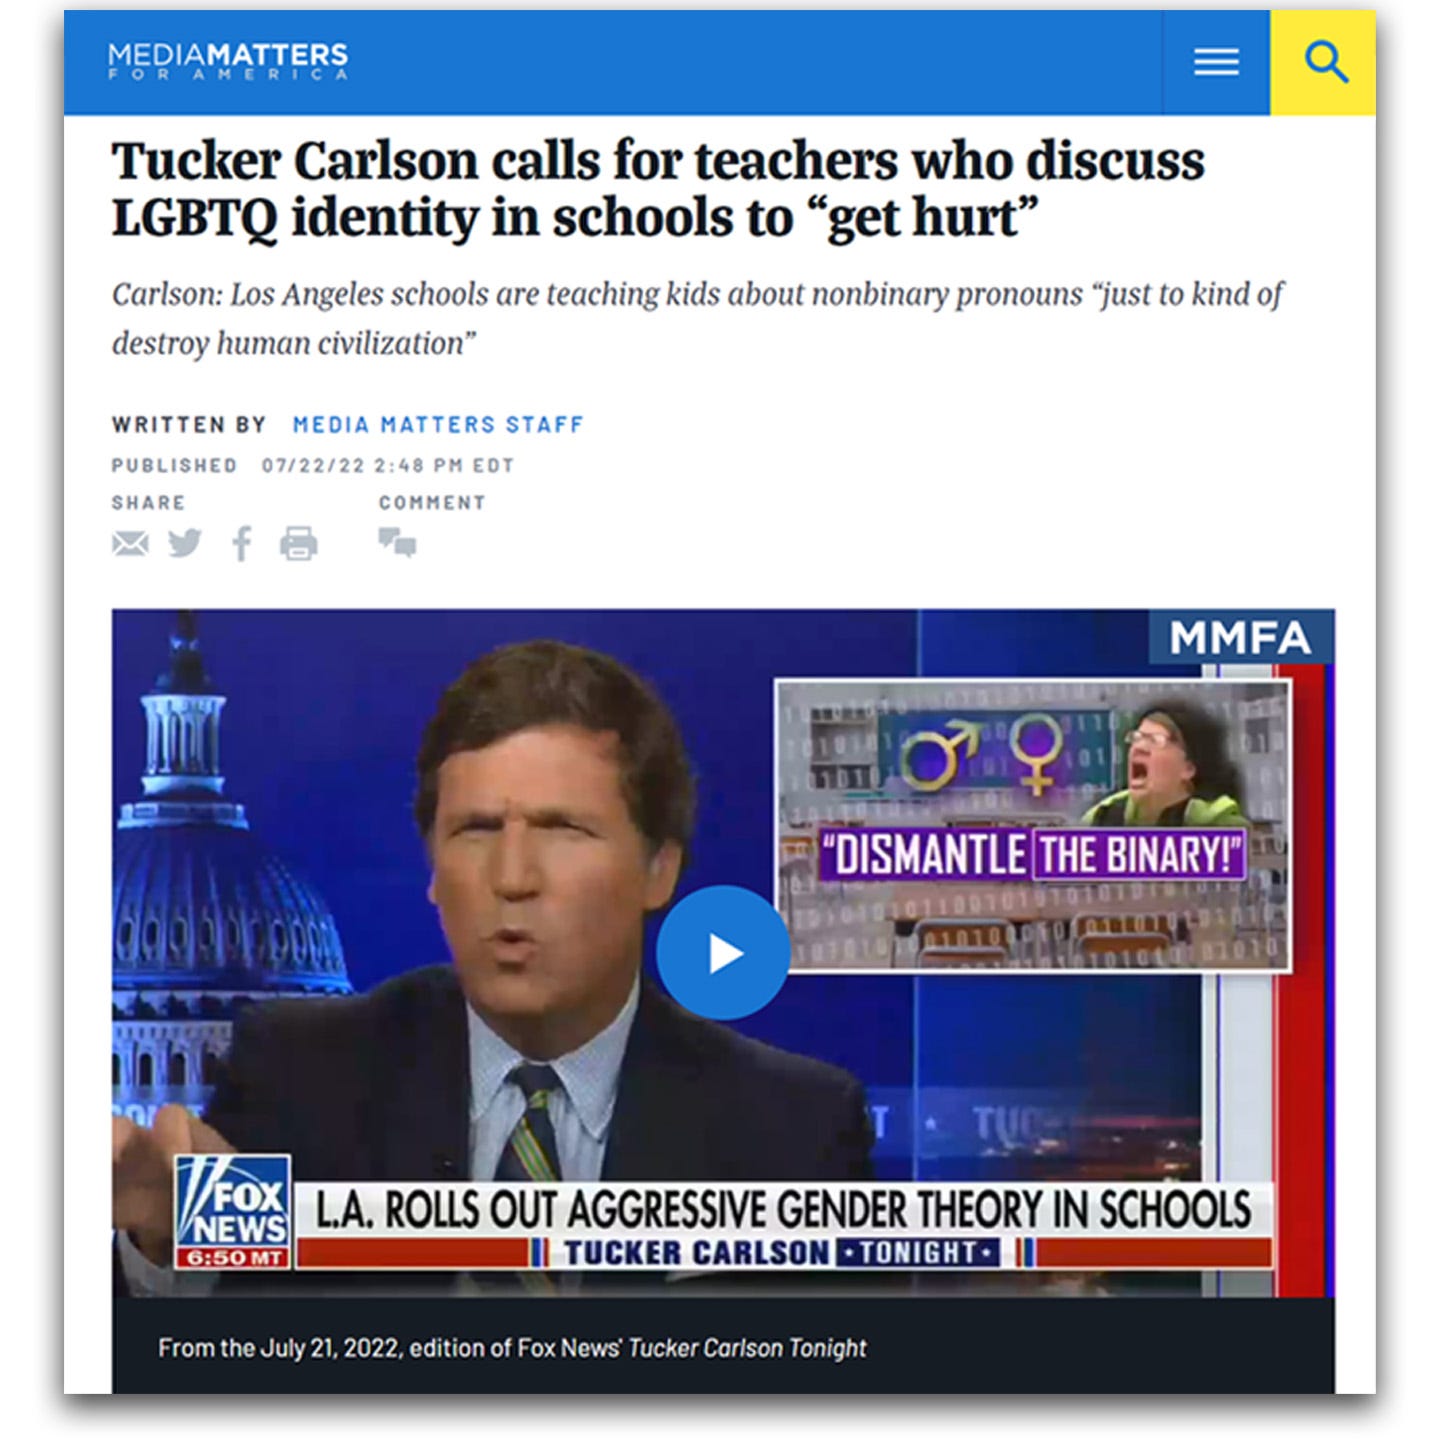 Headline from Media Matters "Tucker Carlson calls for teachers who discuss LGBTQ identity in schools to 'get hurt'"